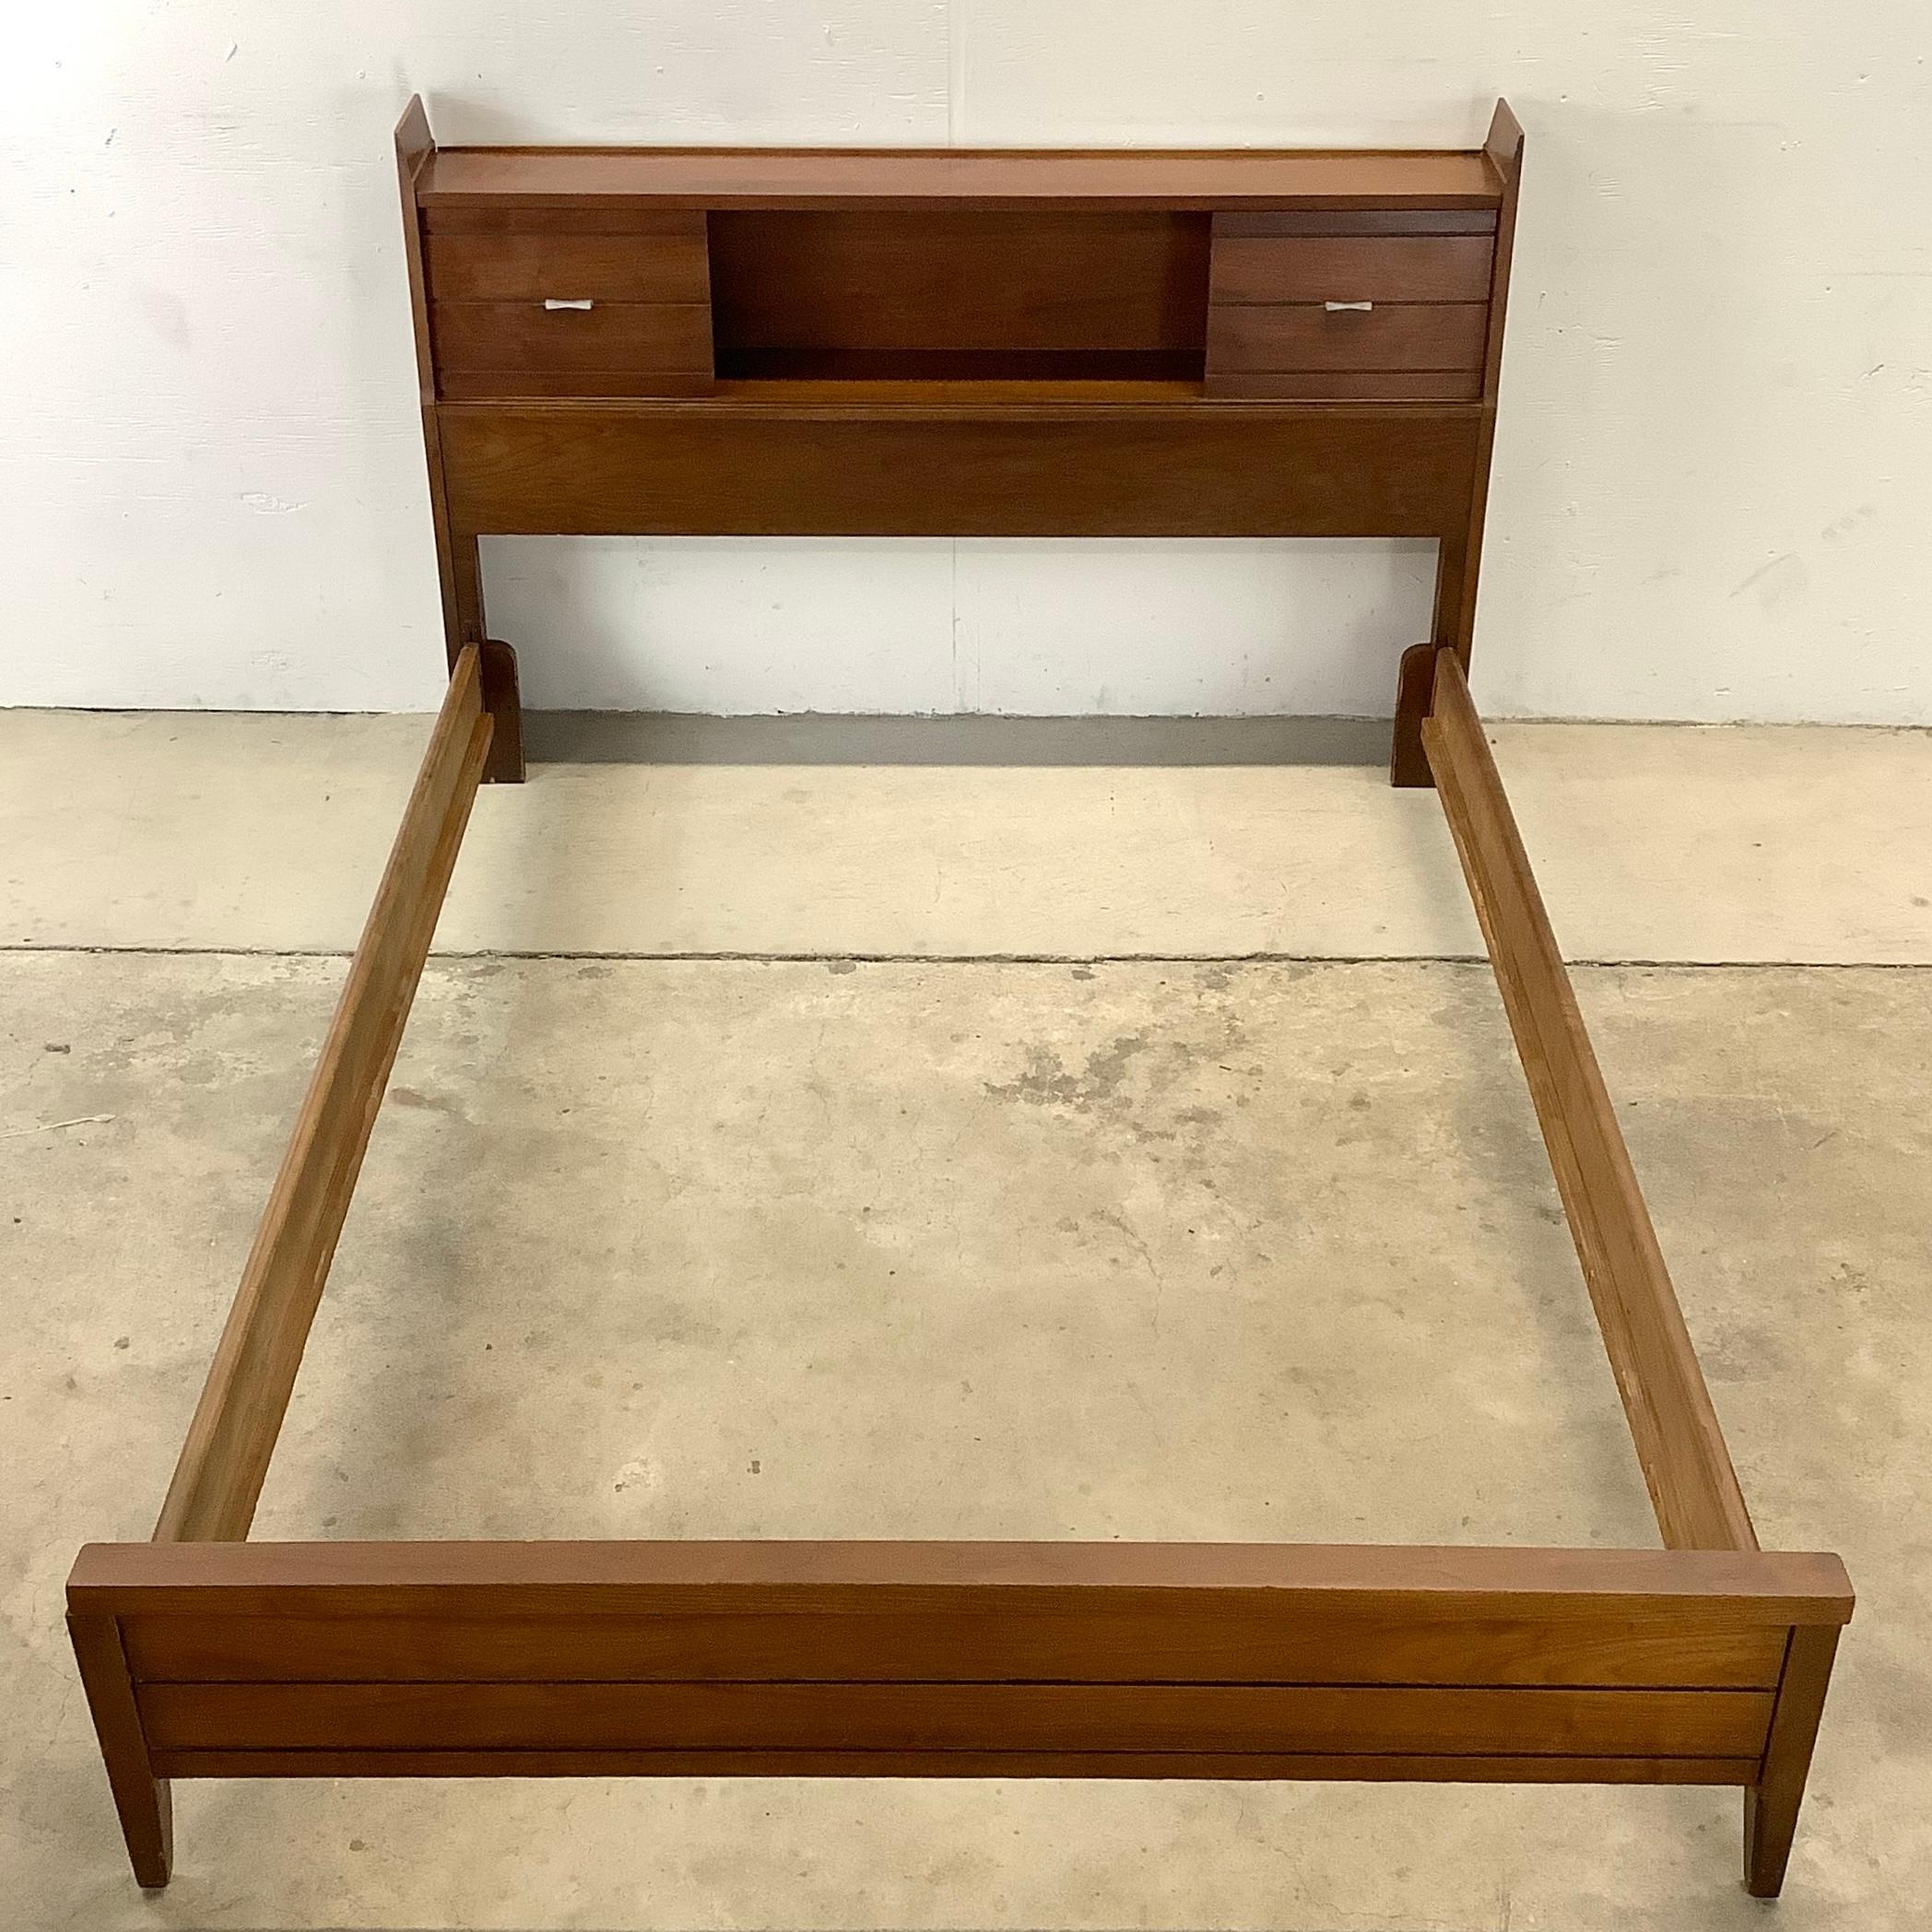 This stylish midcentury bed frame features vintage walnut finish with a unique sliding door storage headboard. The detailed mcm design of the bed frame is meant to fit a full Size bed with approximately 57 inches between the side rails. In a style